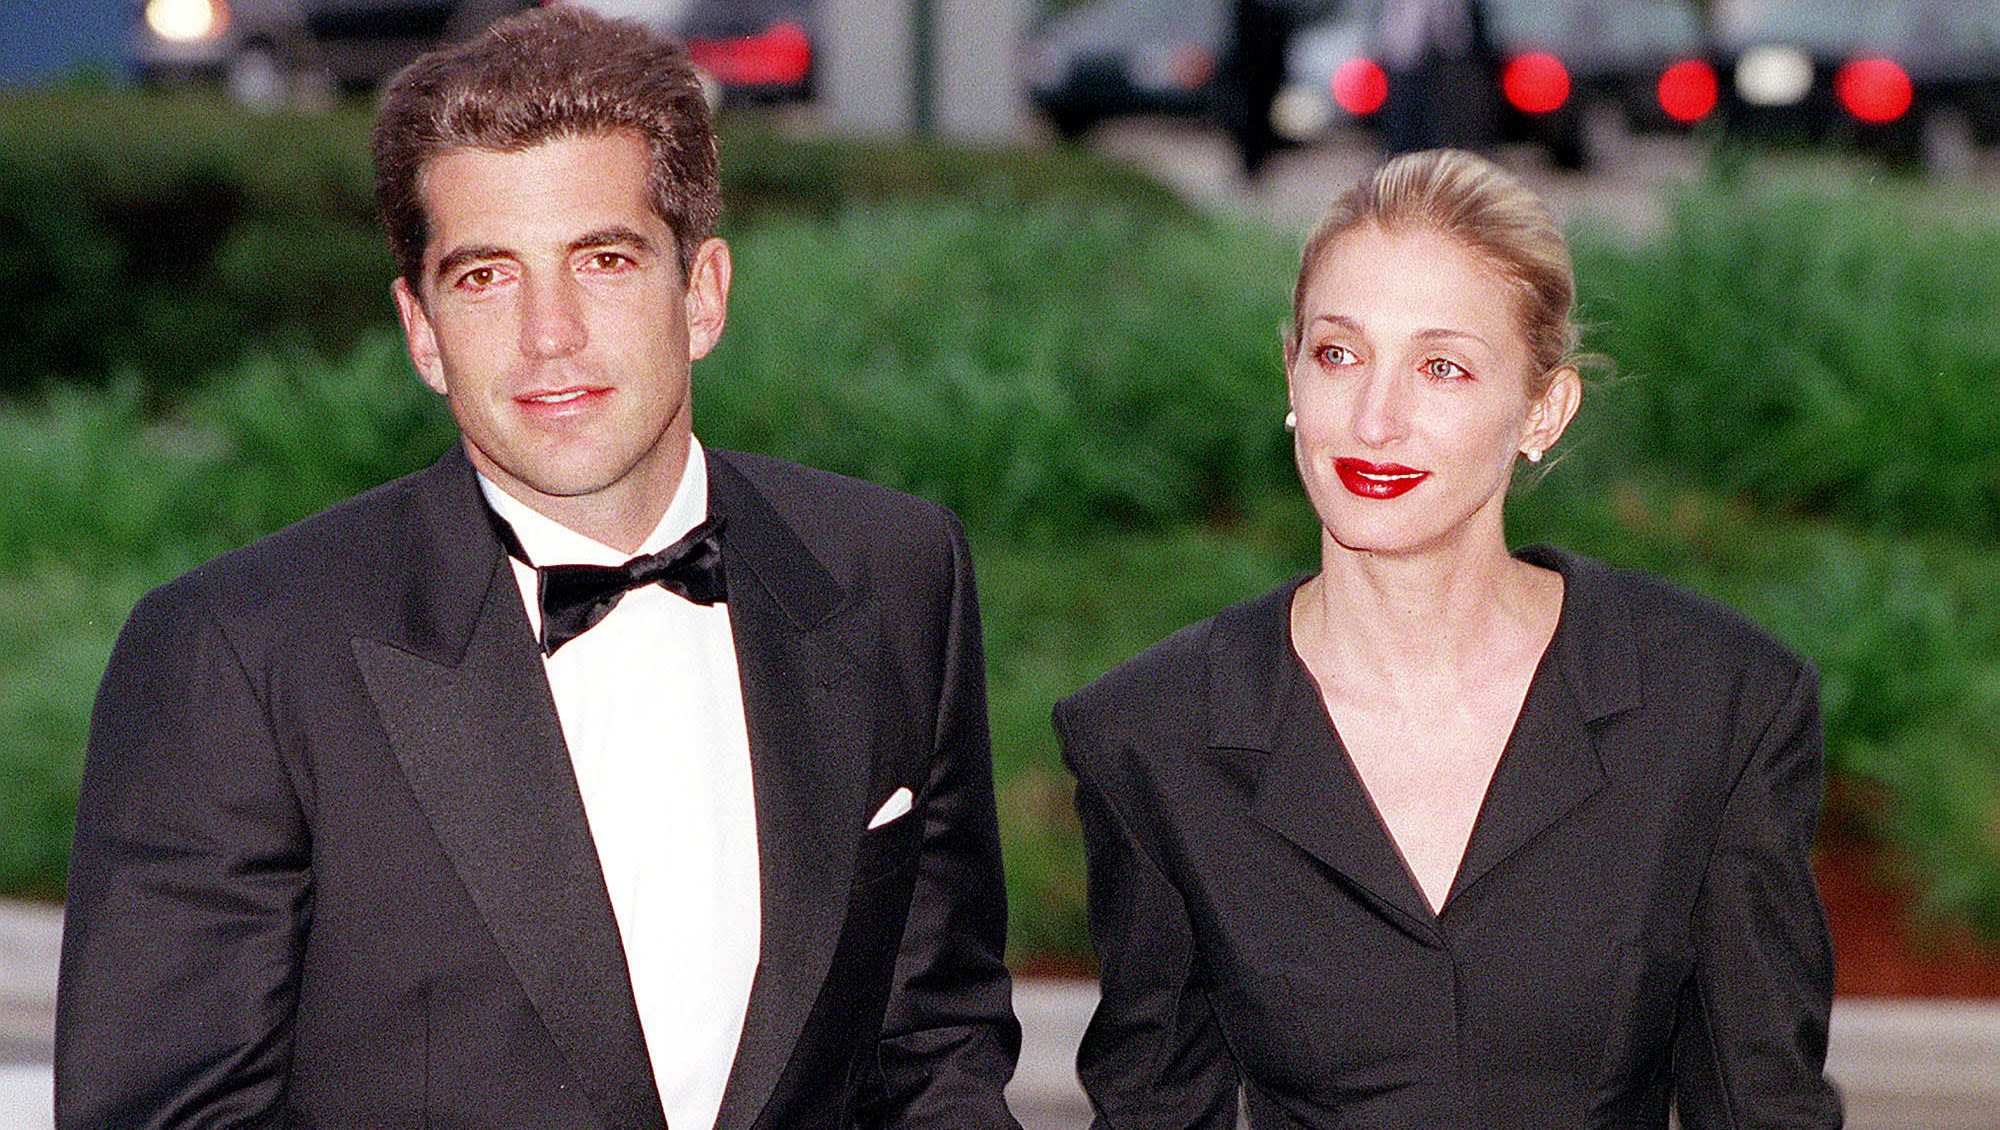 John F. Kennedy Jr. & Carolyn Bessette’s Relationship Drama Unveiled in New Book